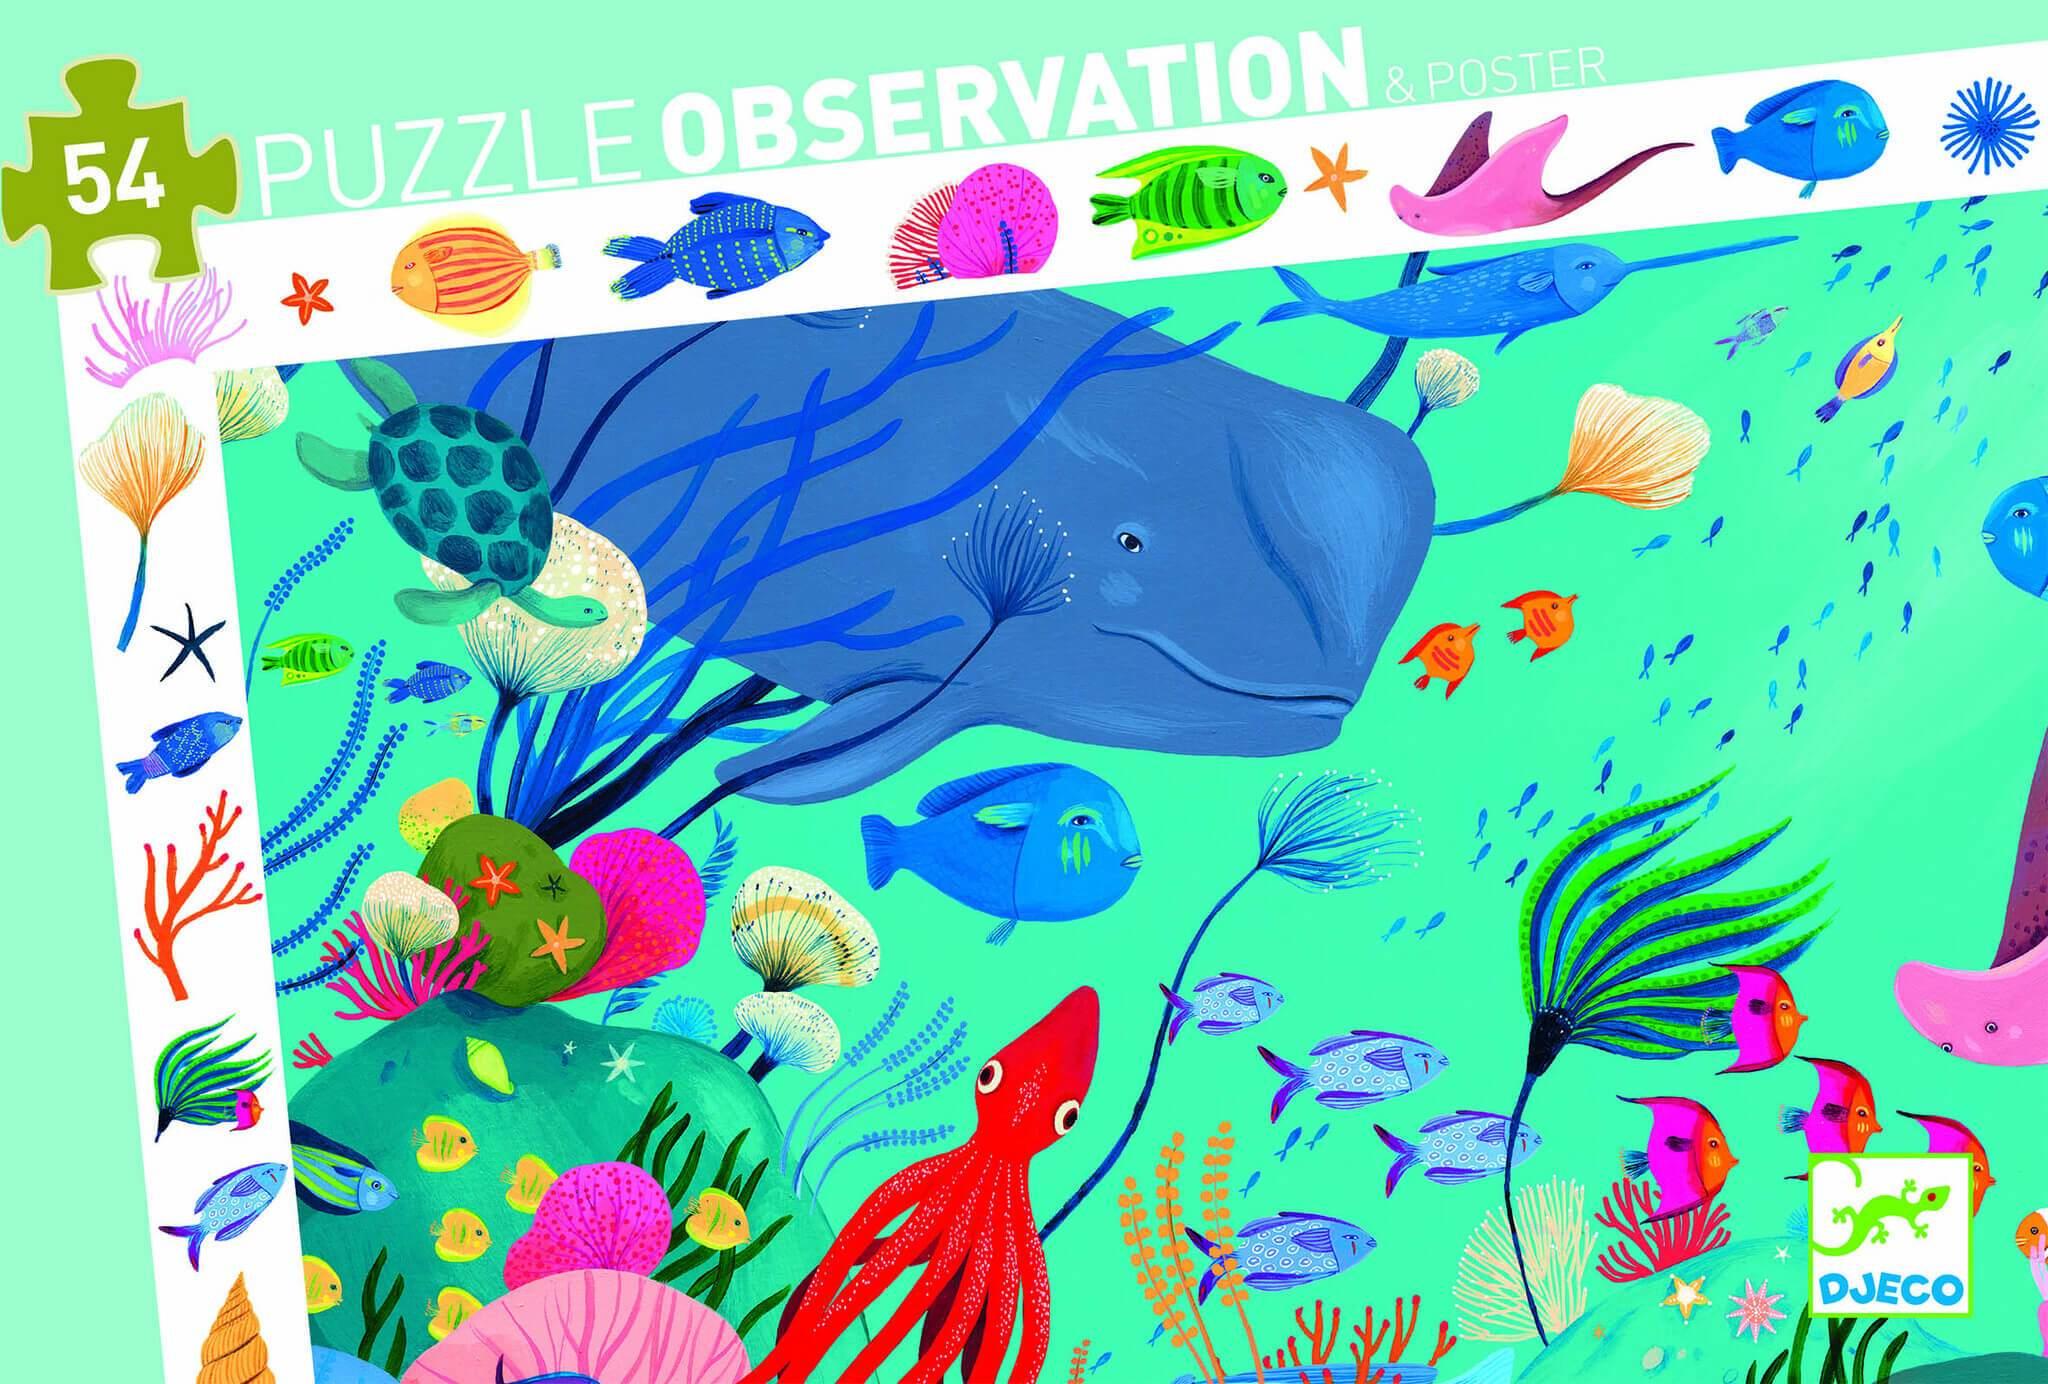 Front cover of Aquatic-themed jigsaw puzzle showing beautiful sea creature illustrations.